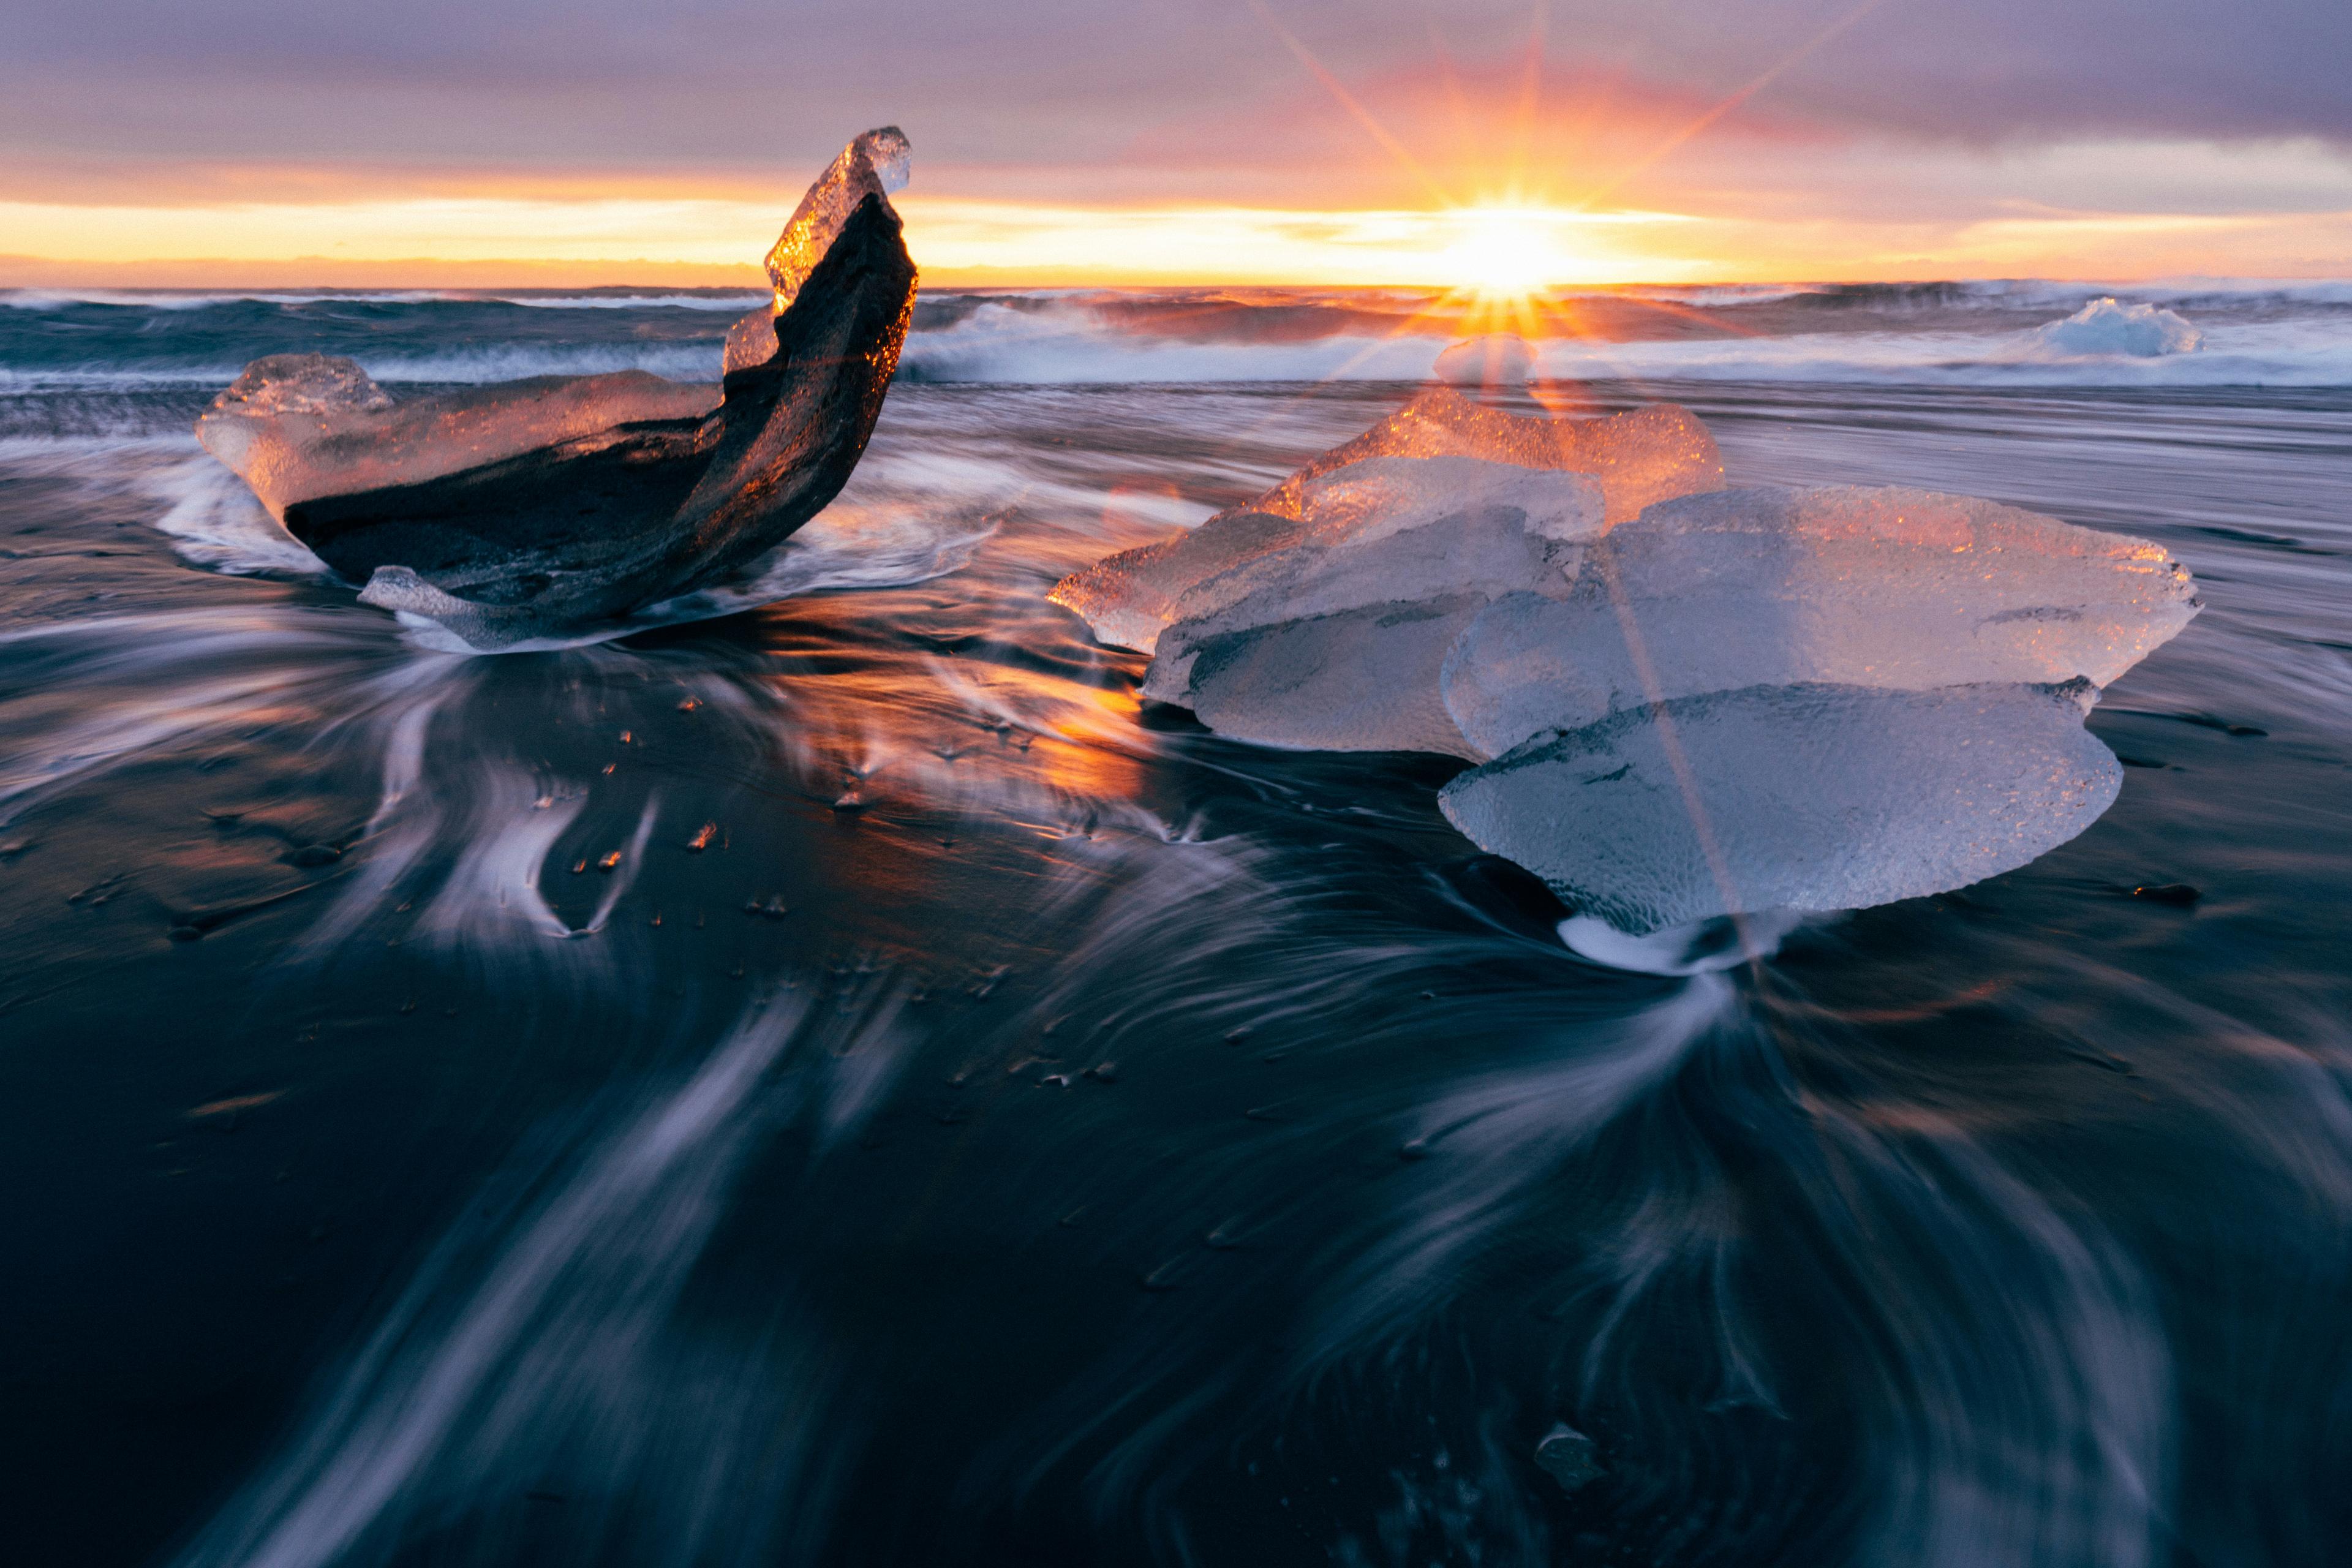 Sunrise over a black sand beach with translucent ice chunks scattered along the shore, waves lapping around them, creating patterns in the water.